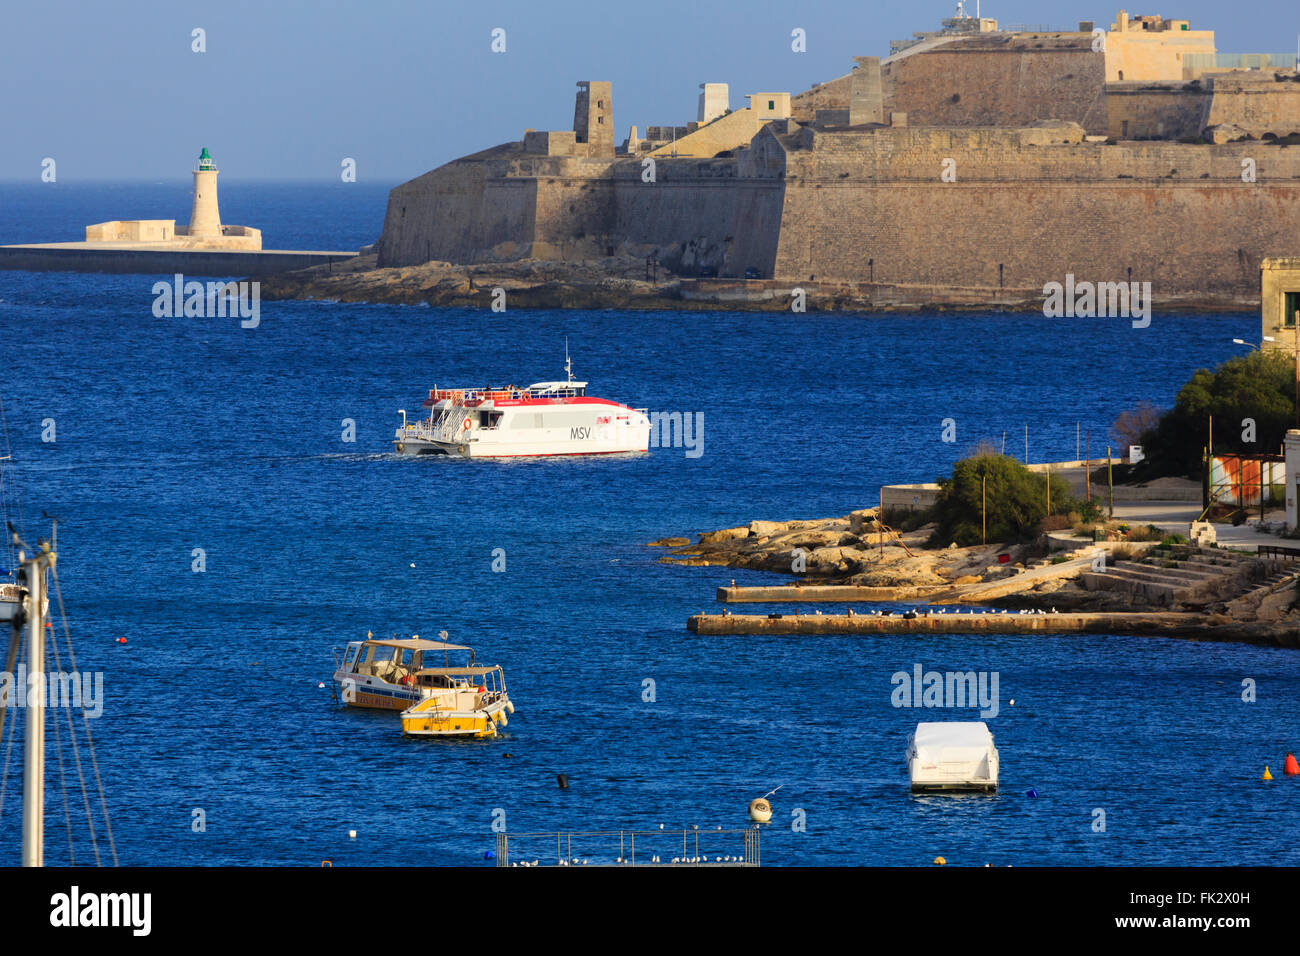 The Sliema - Valletta ferry crossing Grand harbour towards the walls of Fort St Elmo. Stock Photo